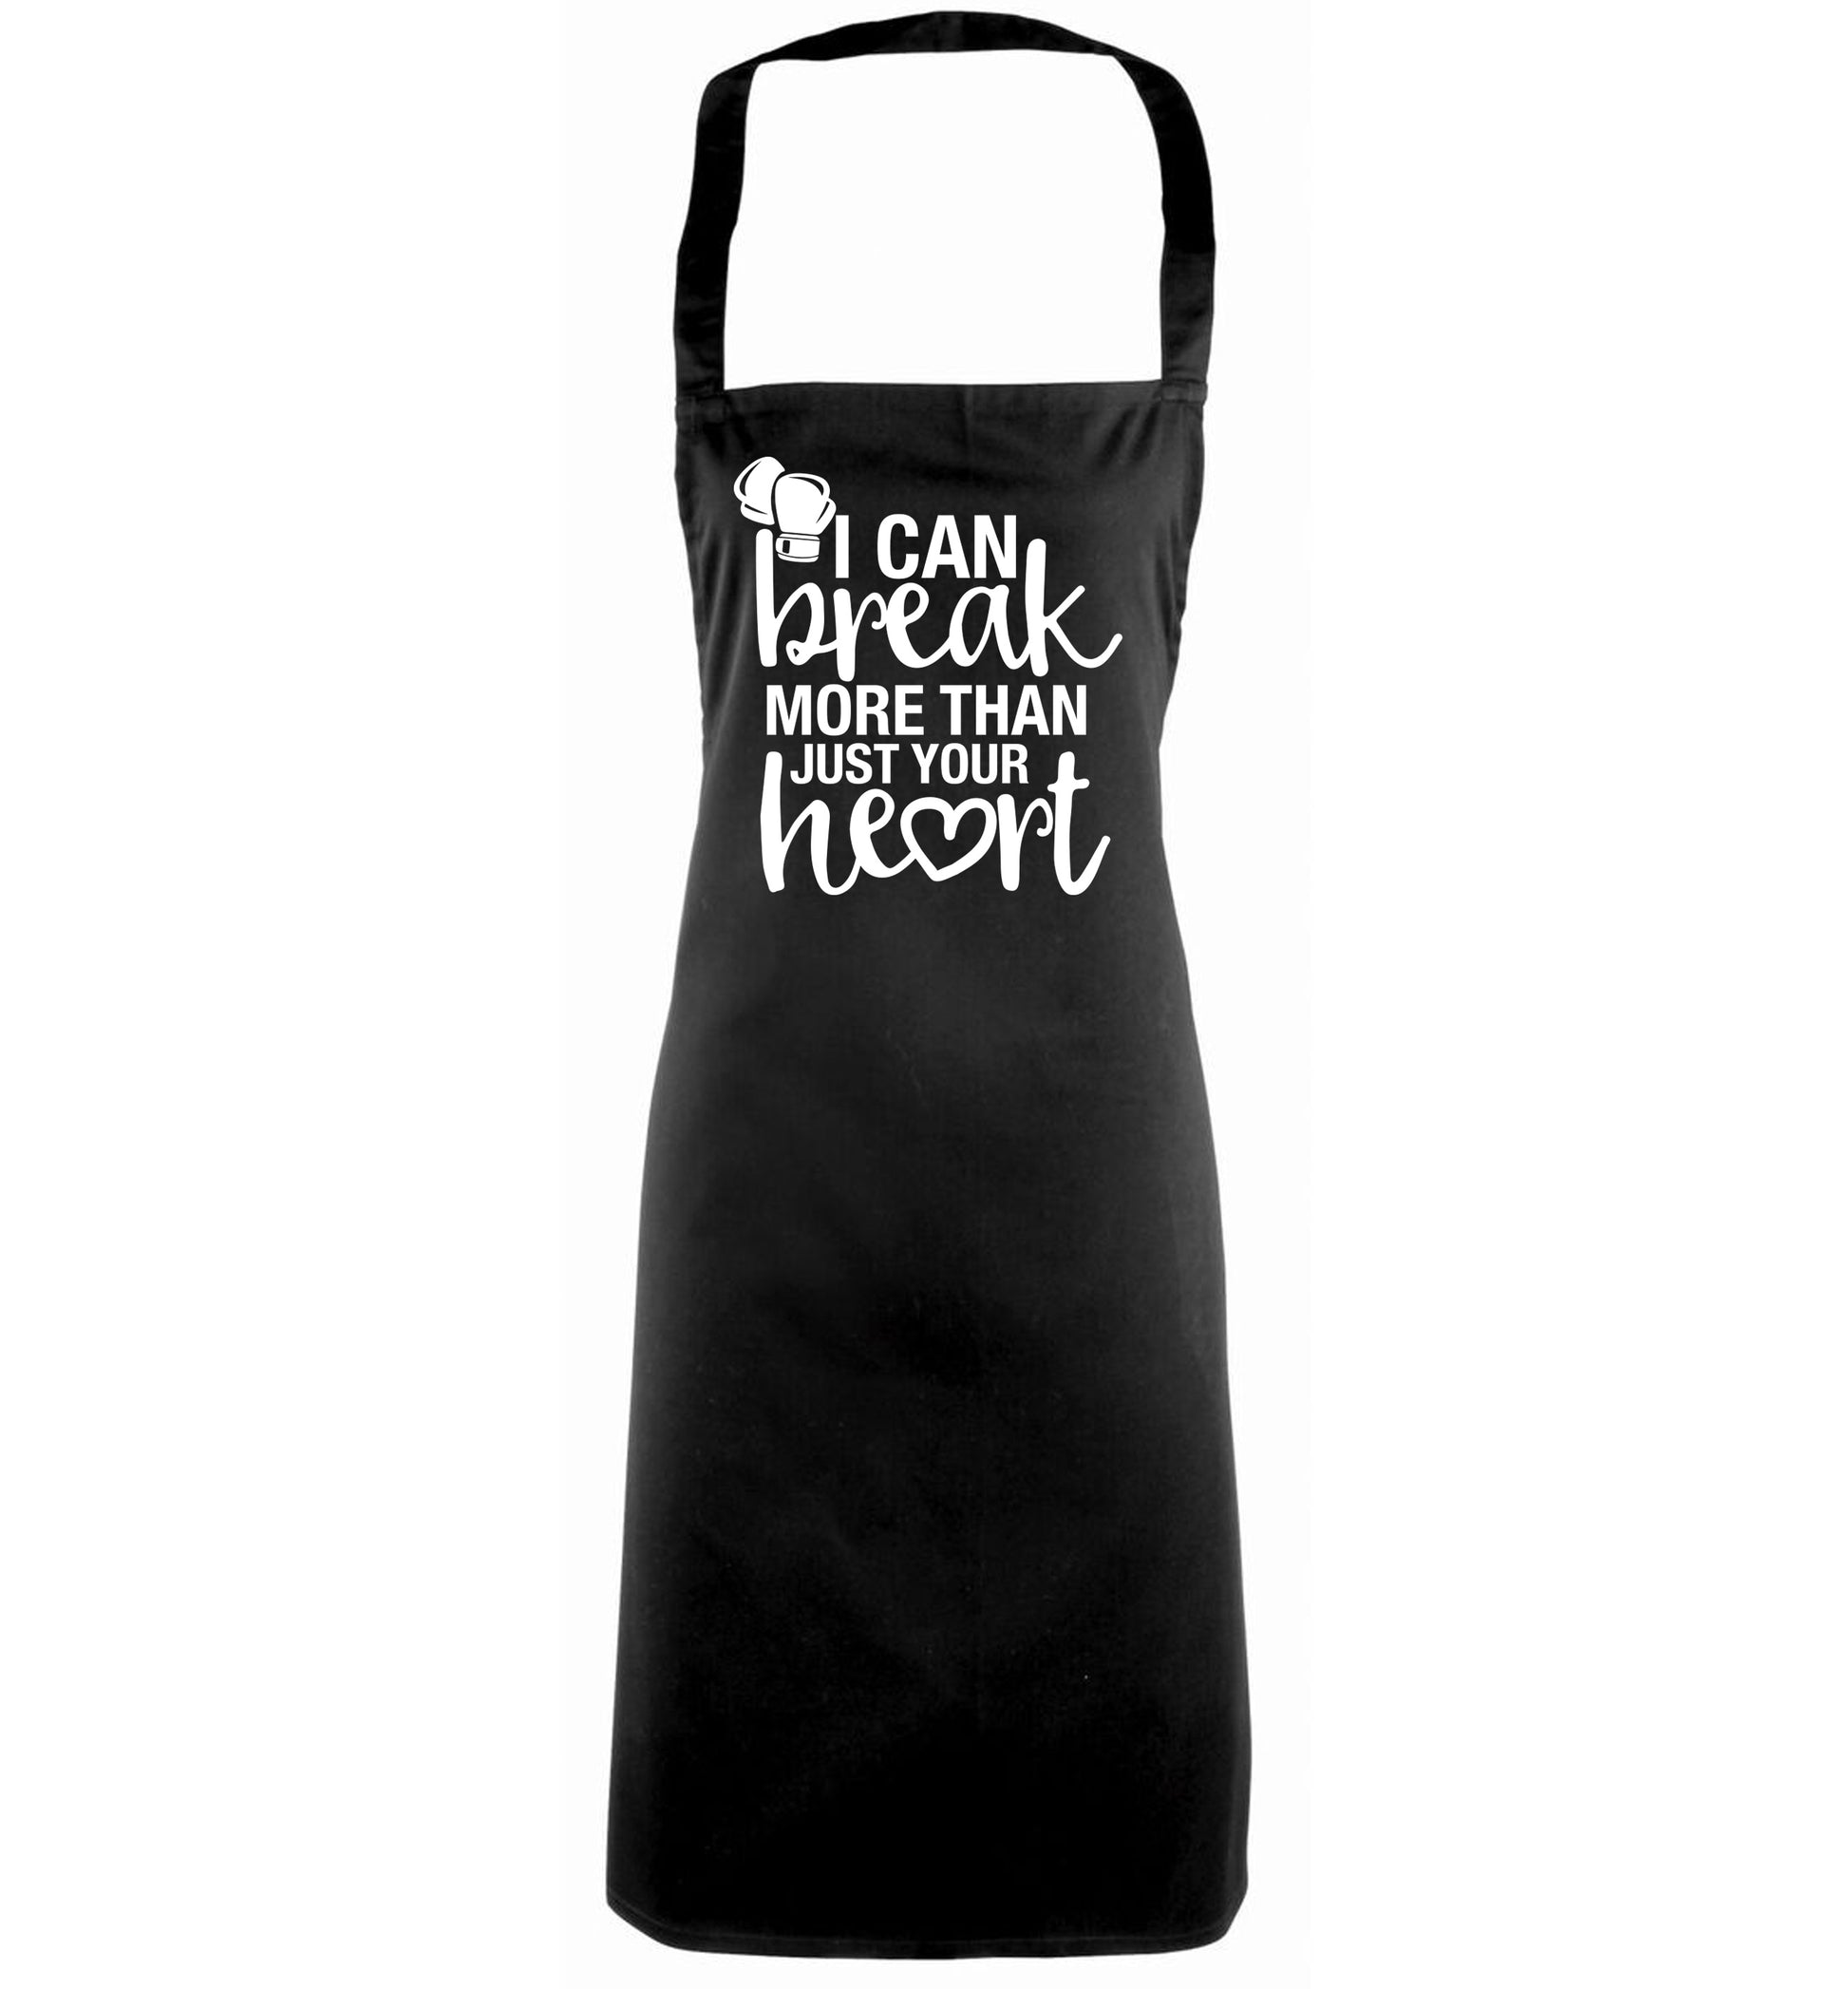 I can break more than just your heart black apron